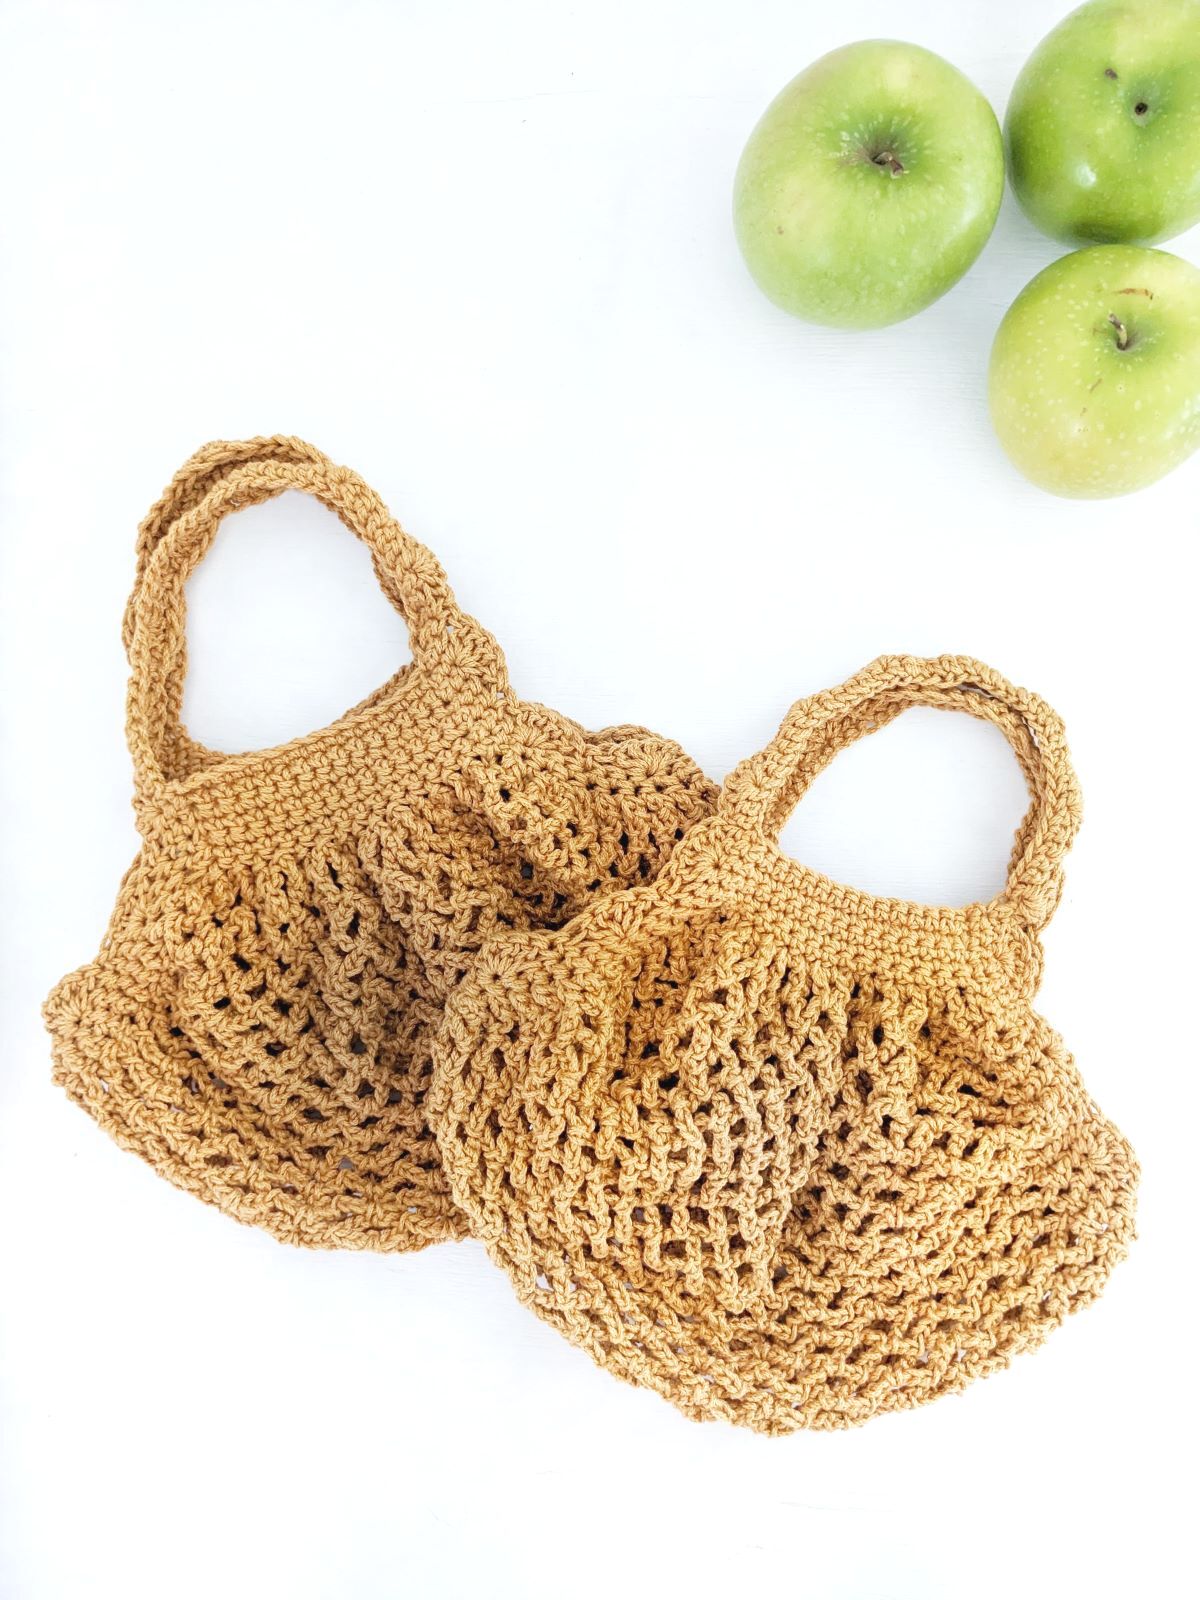 2 small crochet market bags with 3 green apples.